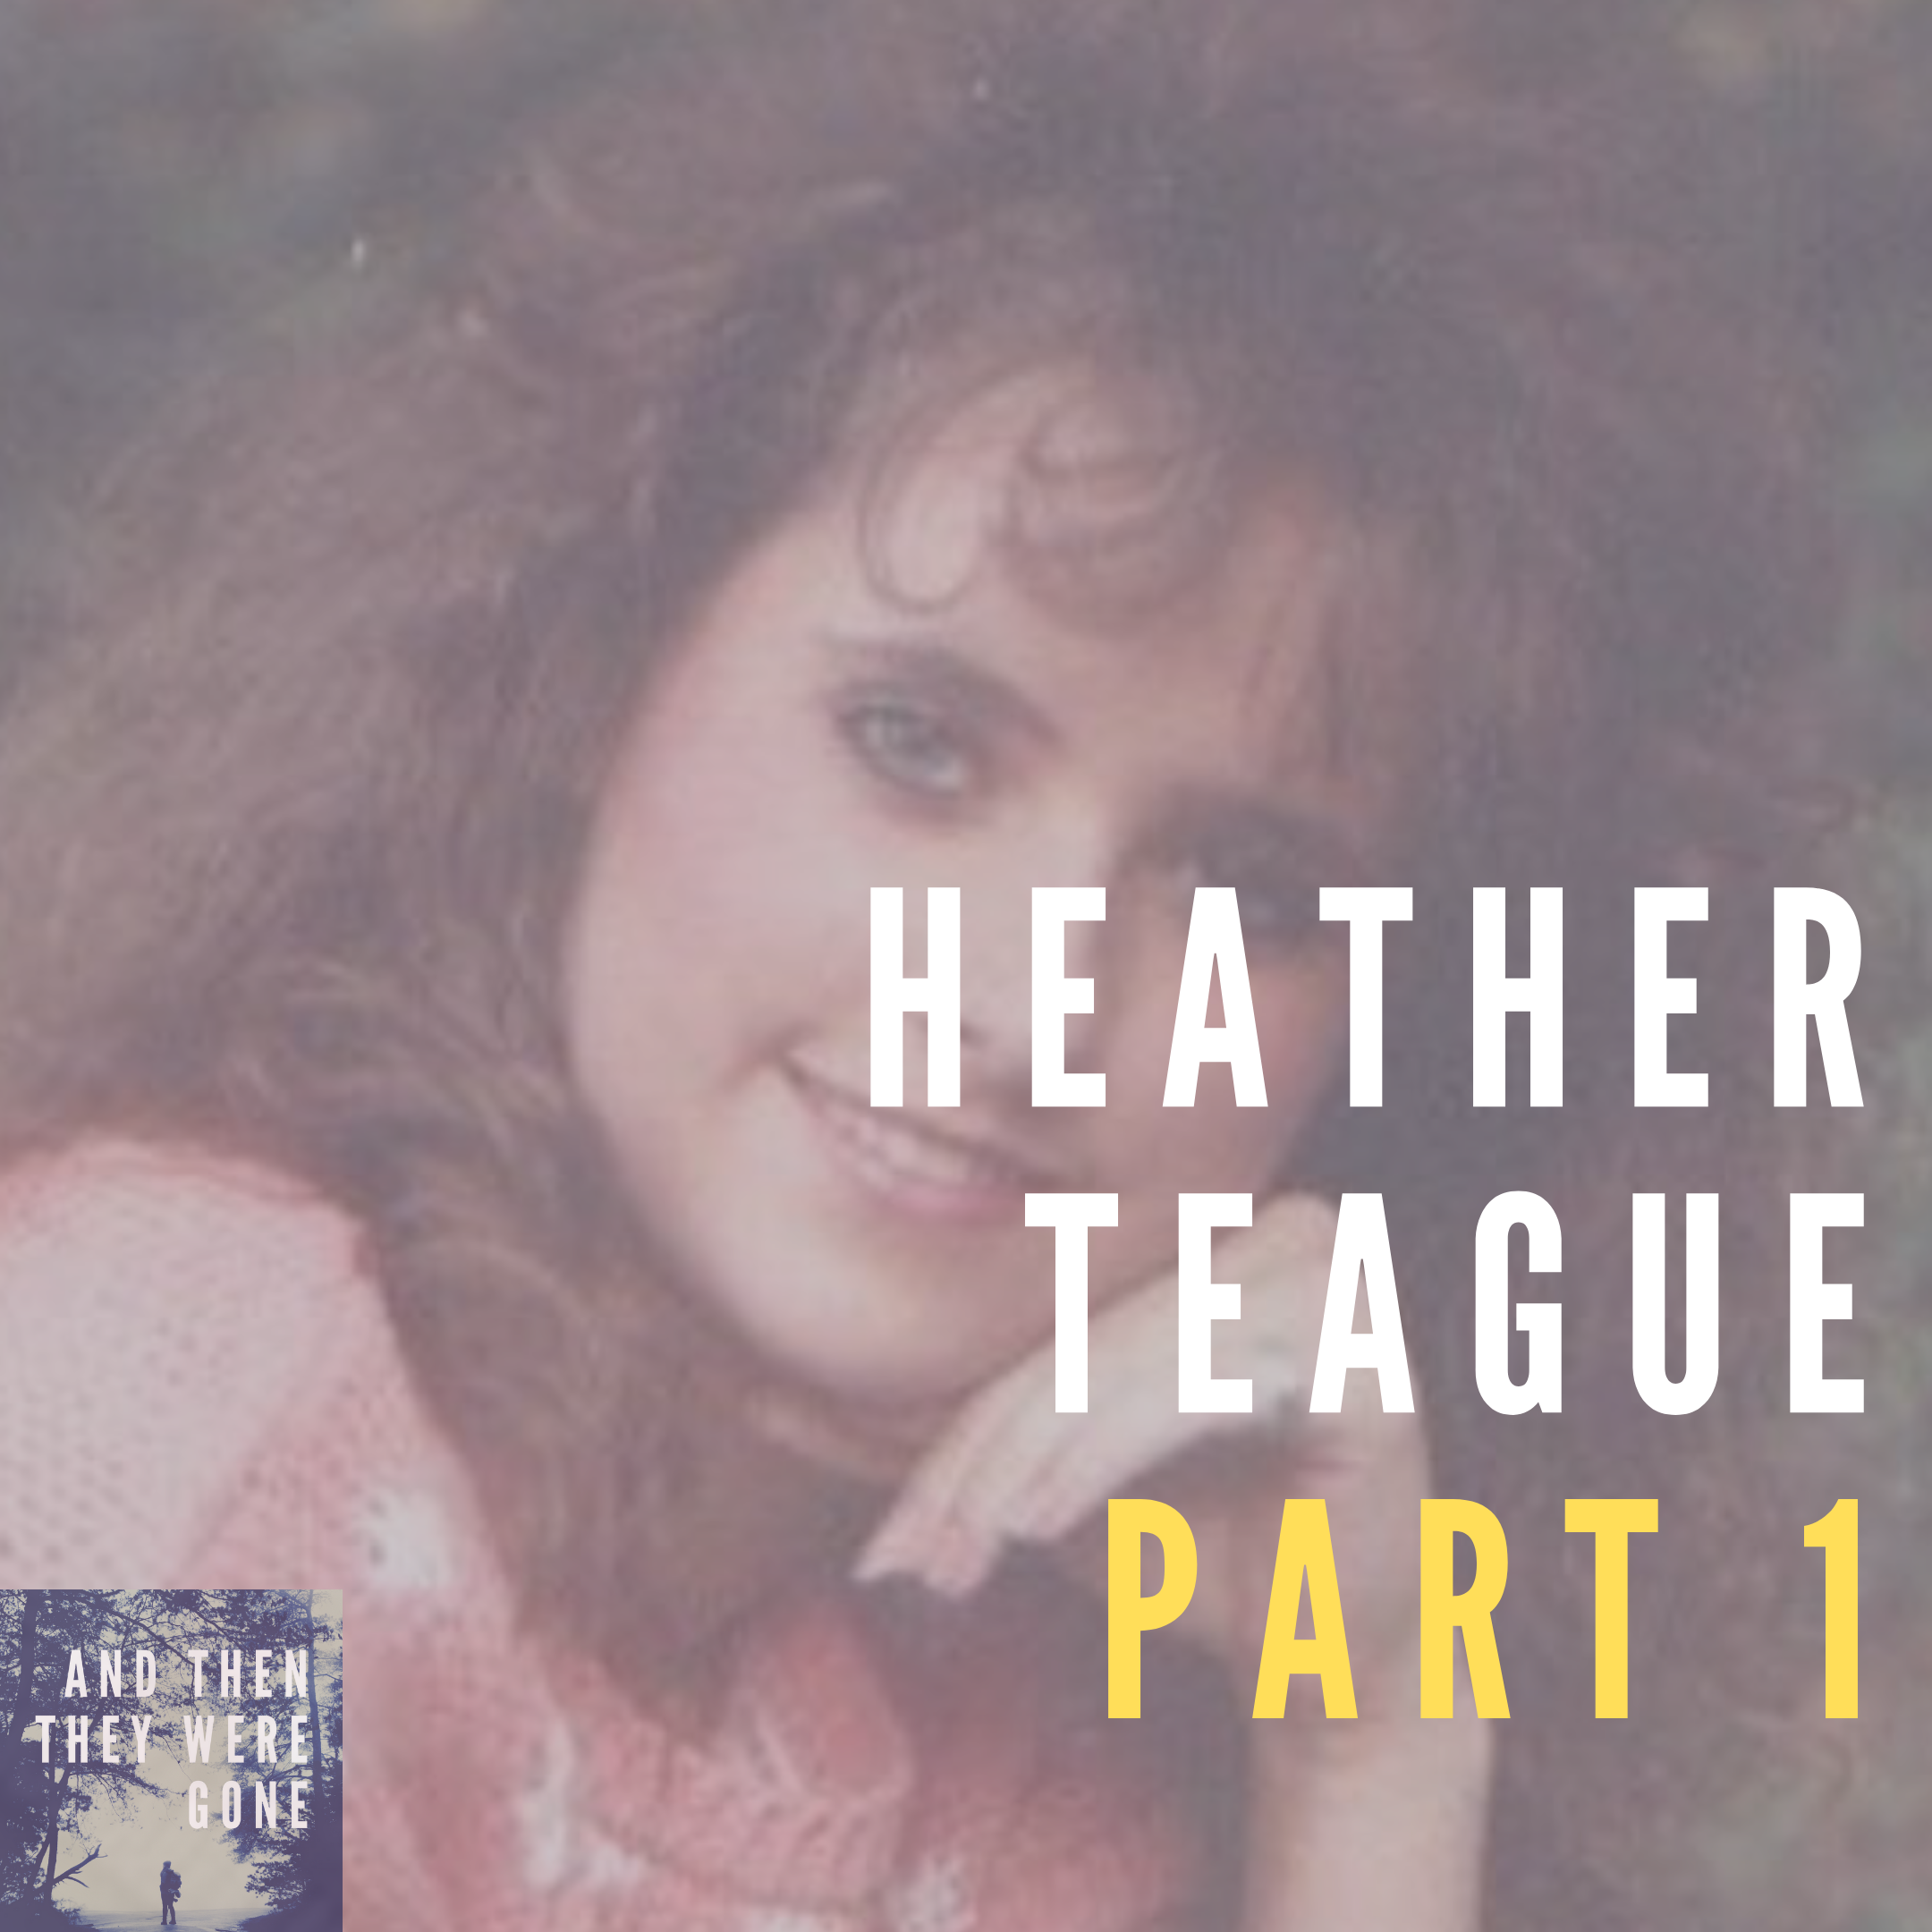 Heather Teague: Missing since August 26, 1995